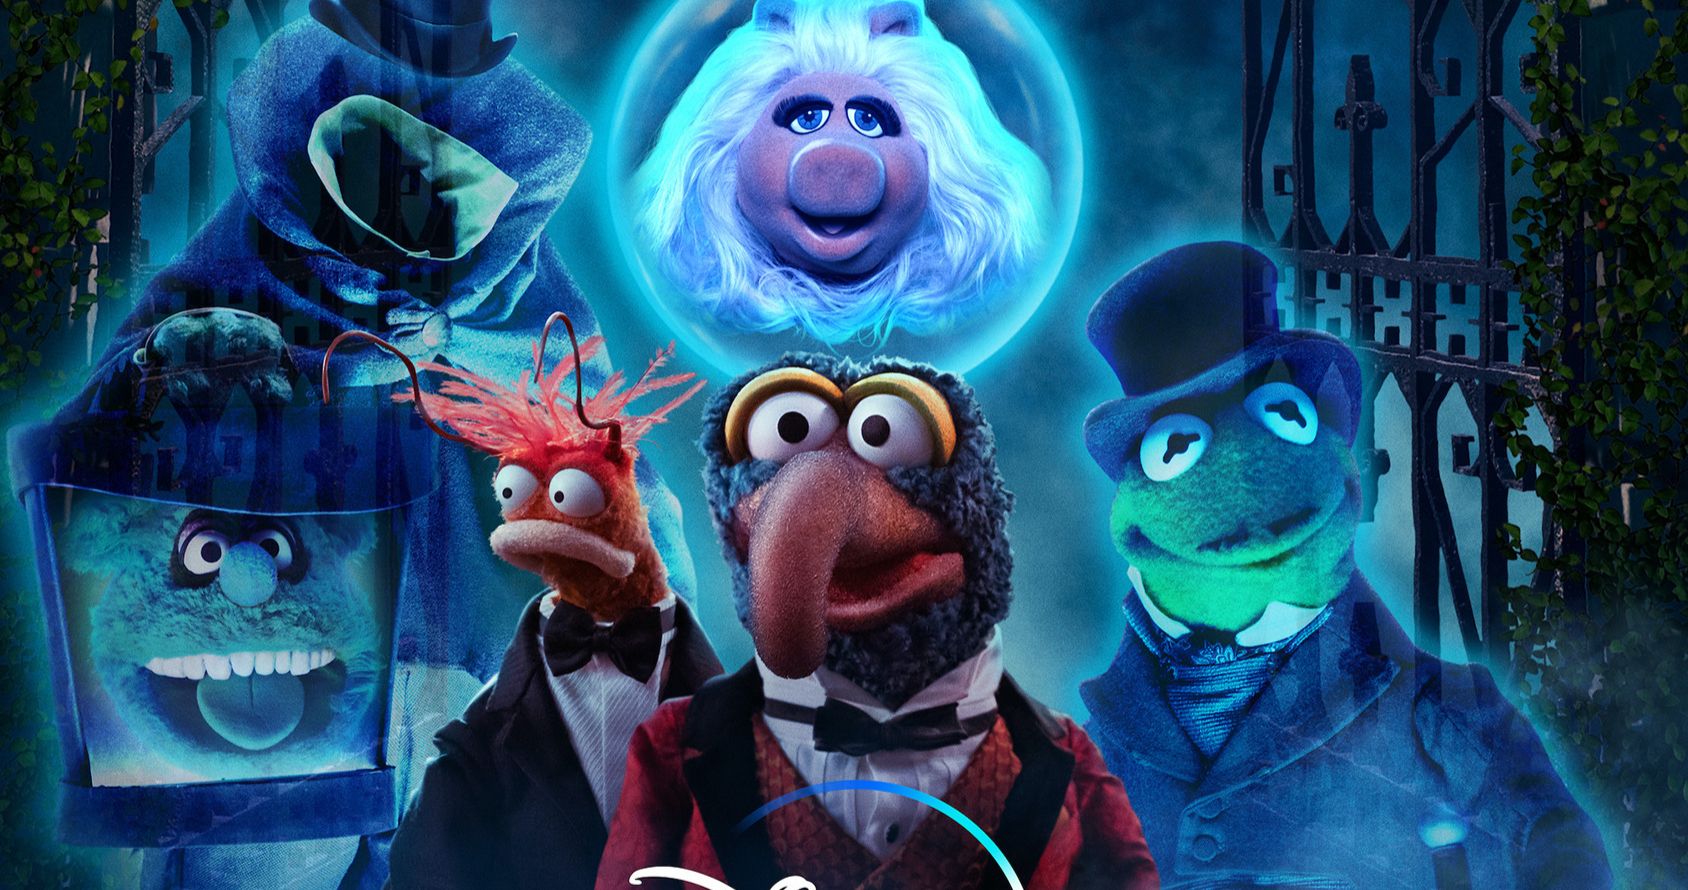 Muppets Haunted Mansion Poster Invites Kermit &amp; Friends to the Ultimate Halloween Party